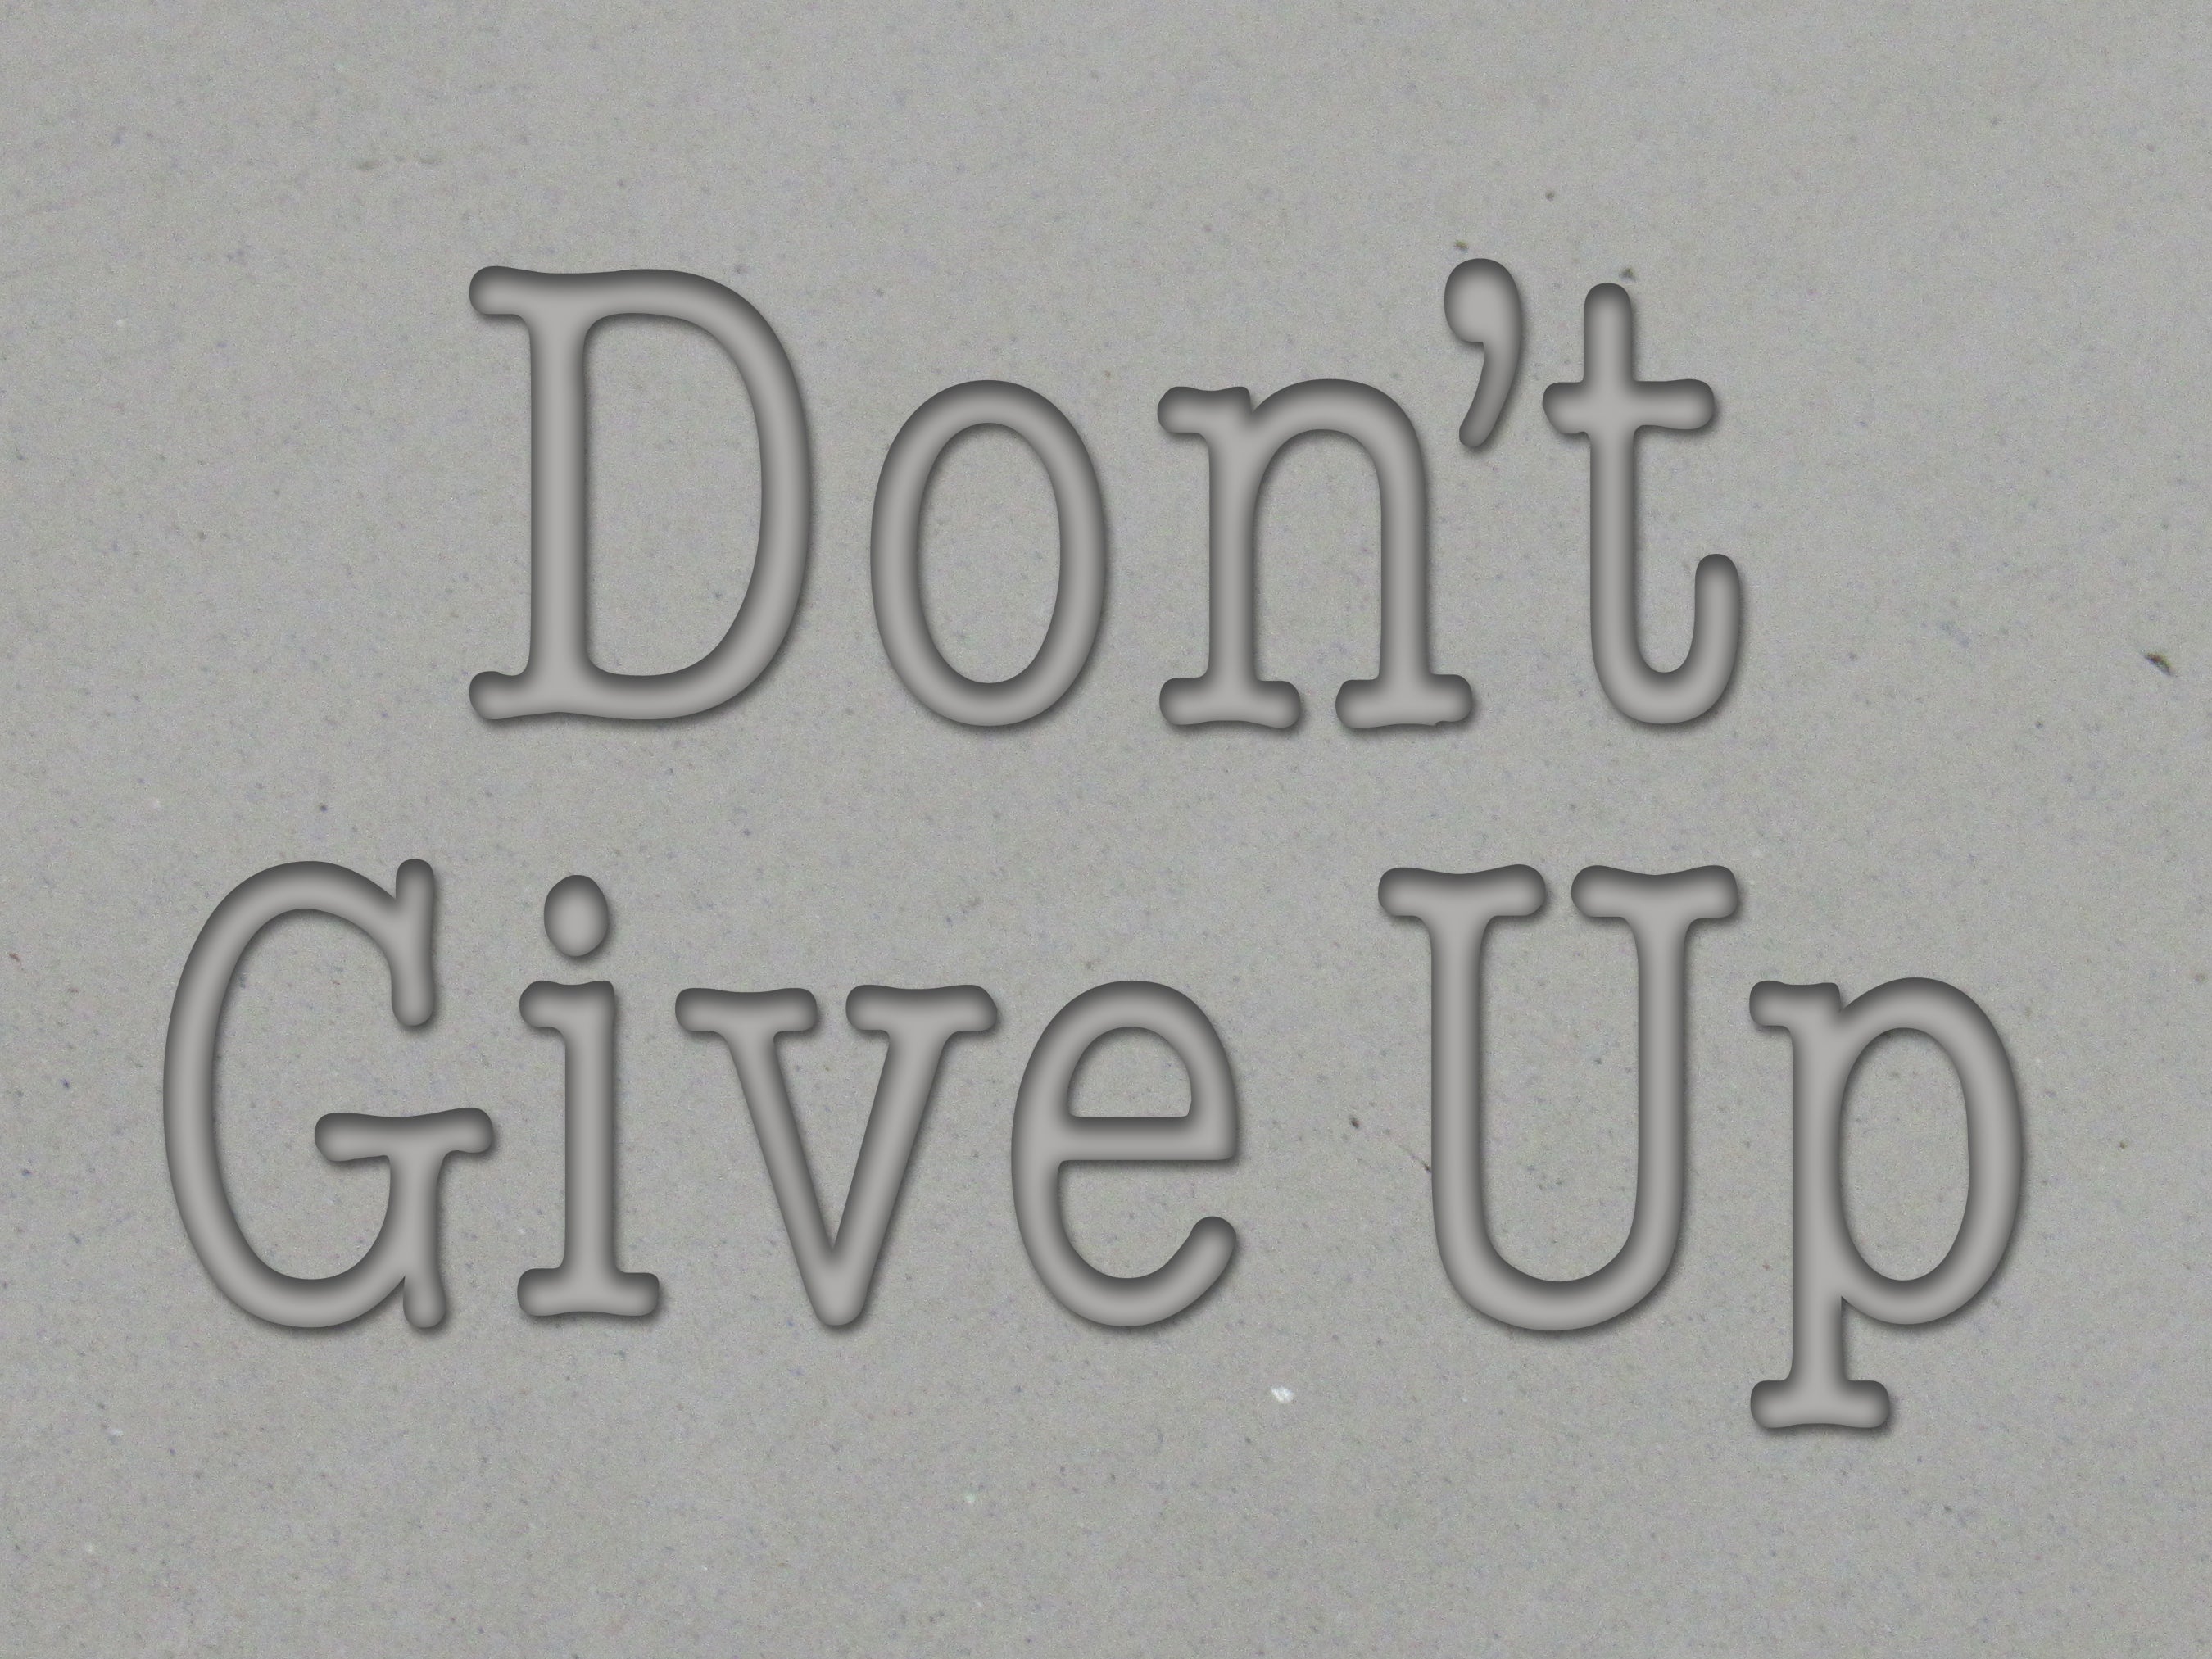 Inspirational "Don't Give Up" pottery stamp, Mug clay stamp for slab built pottery